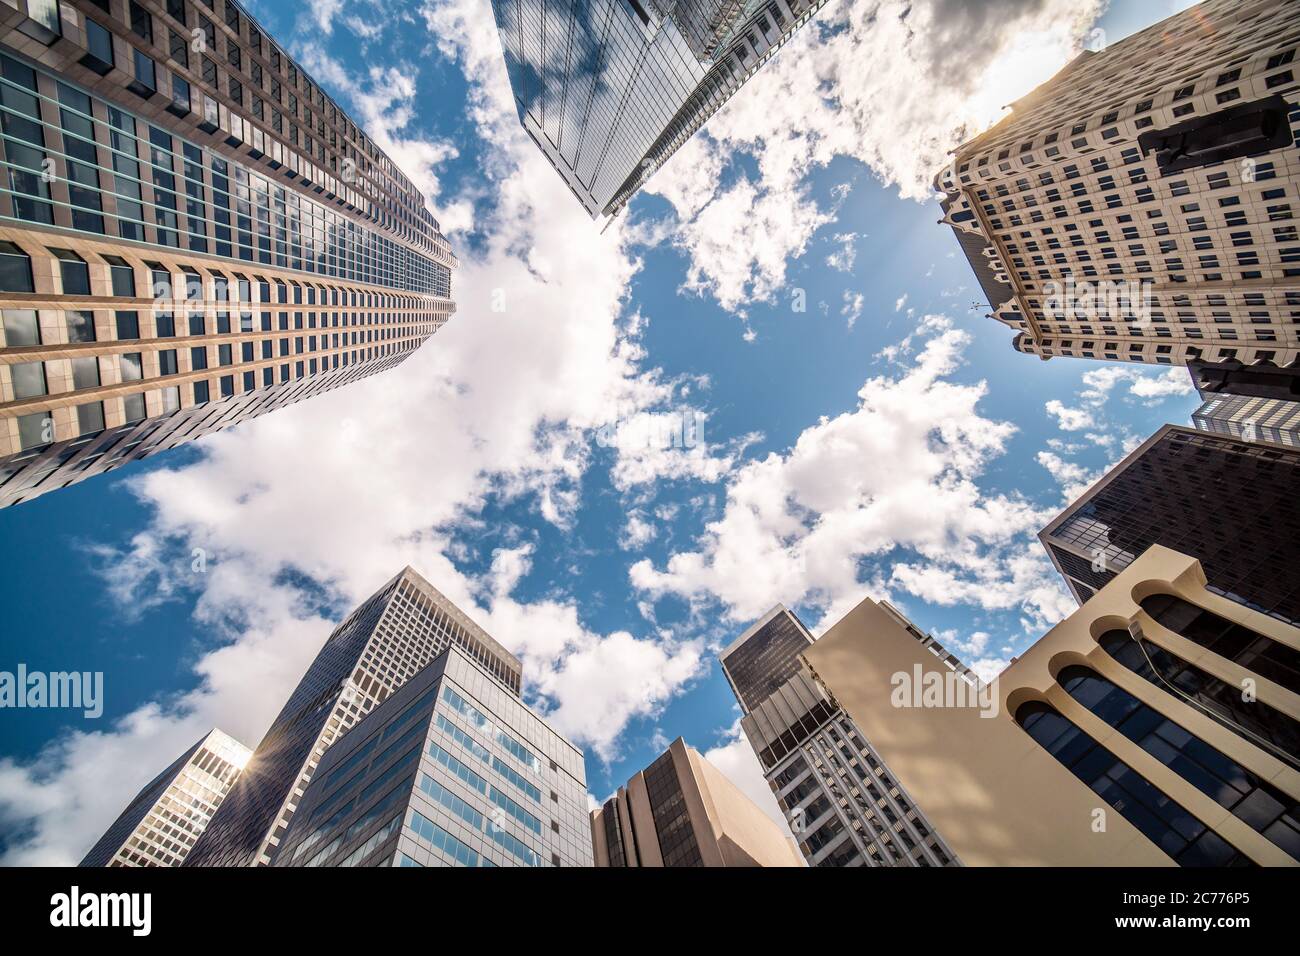 Business and finance concept, looking up at modern office building architecture in the financial district DTLA against the blue sky. Los Angeles Stock Photo